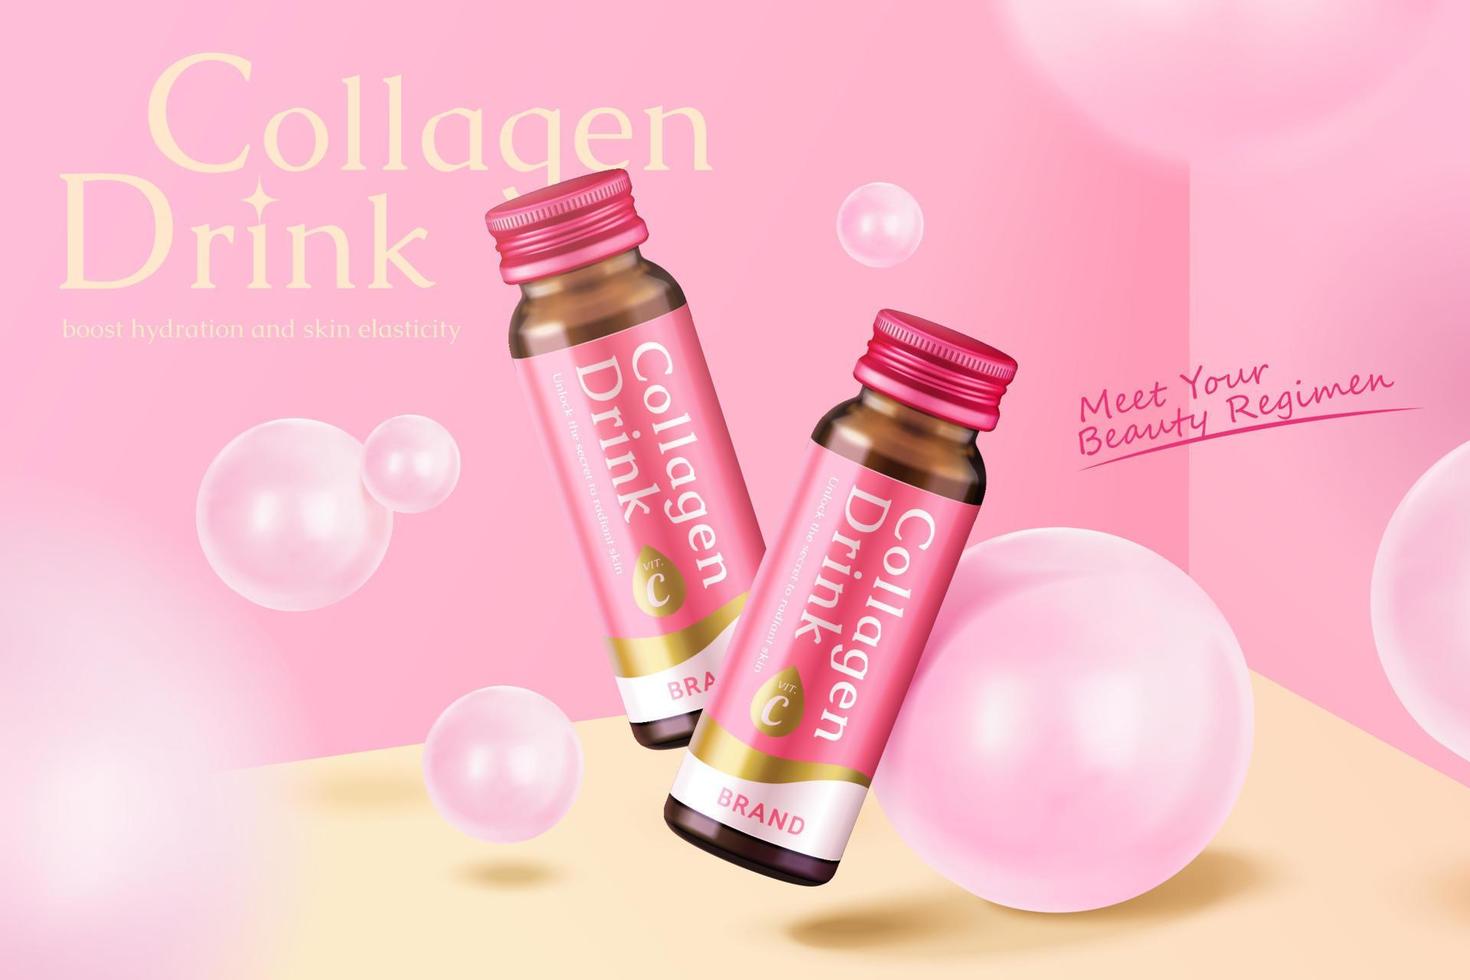 3d minimal supplement product ad template with collagen drink bottle mock-ups bouncing around pink balls in a studio room. vector